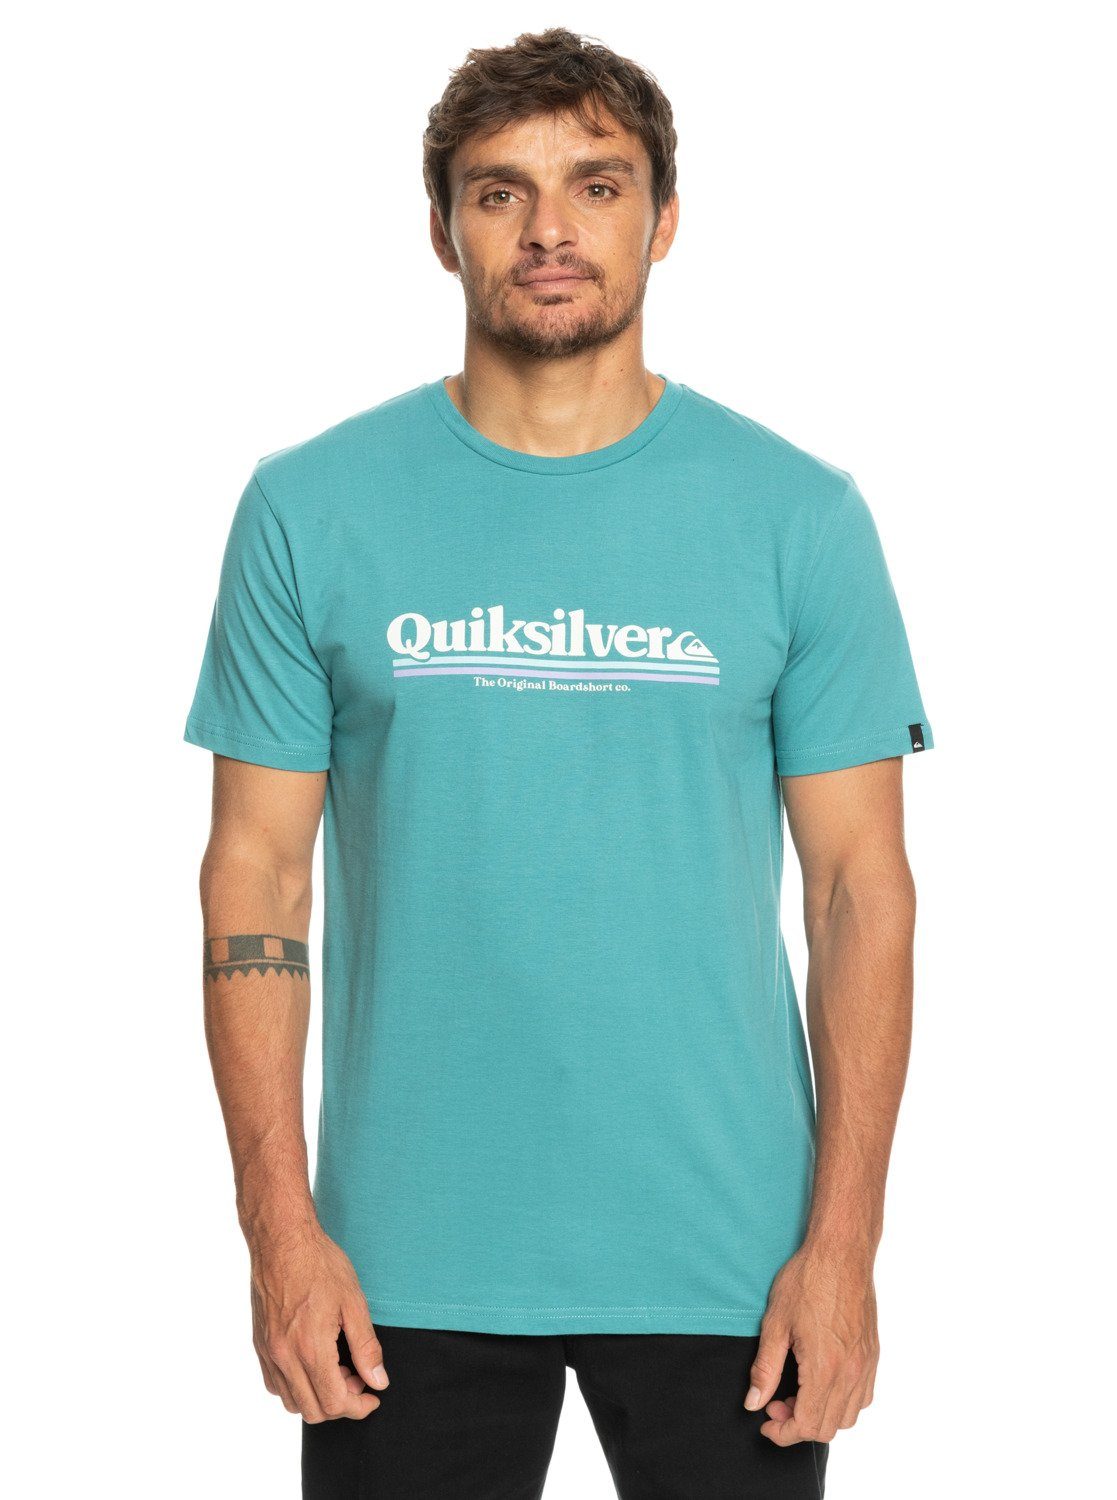 Quiksilver T-Shirt Between The Lines Brittany Blue